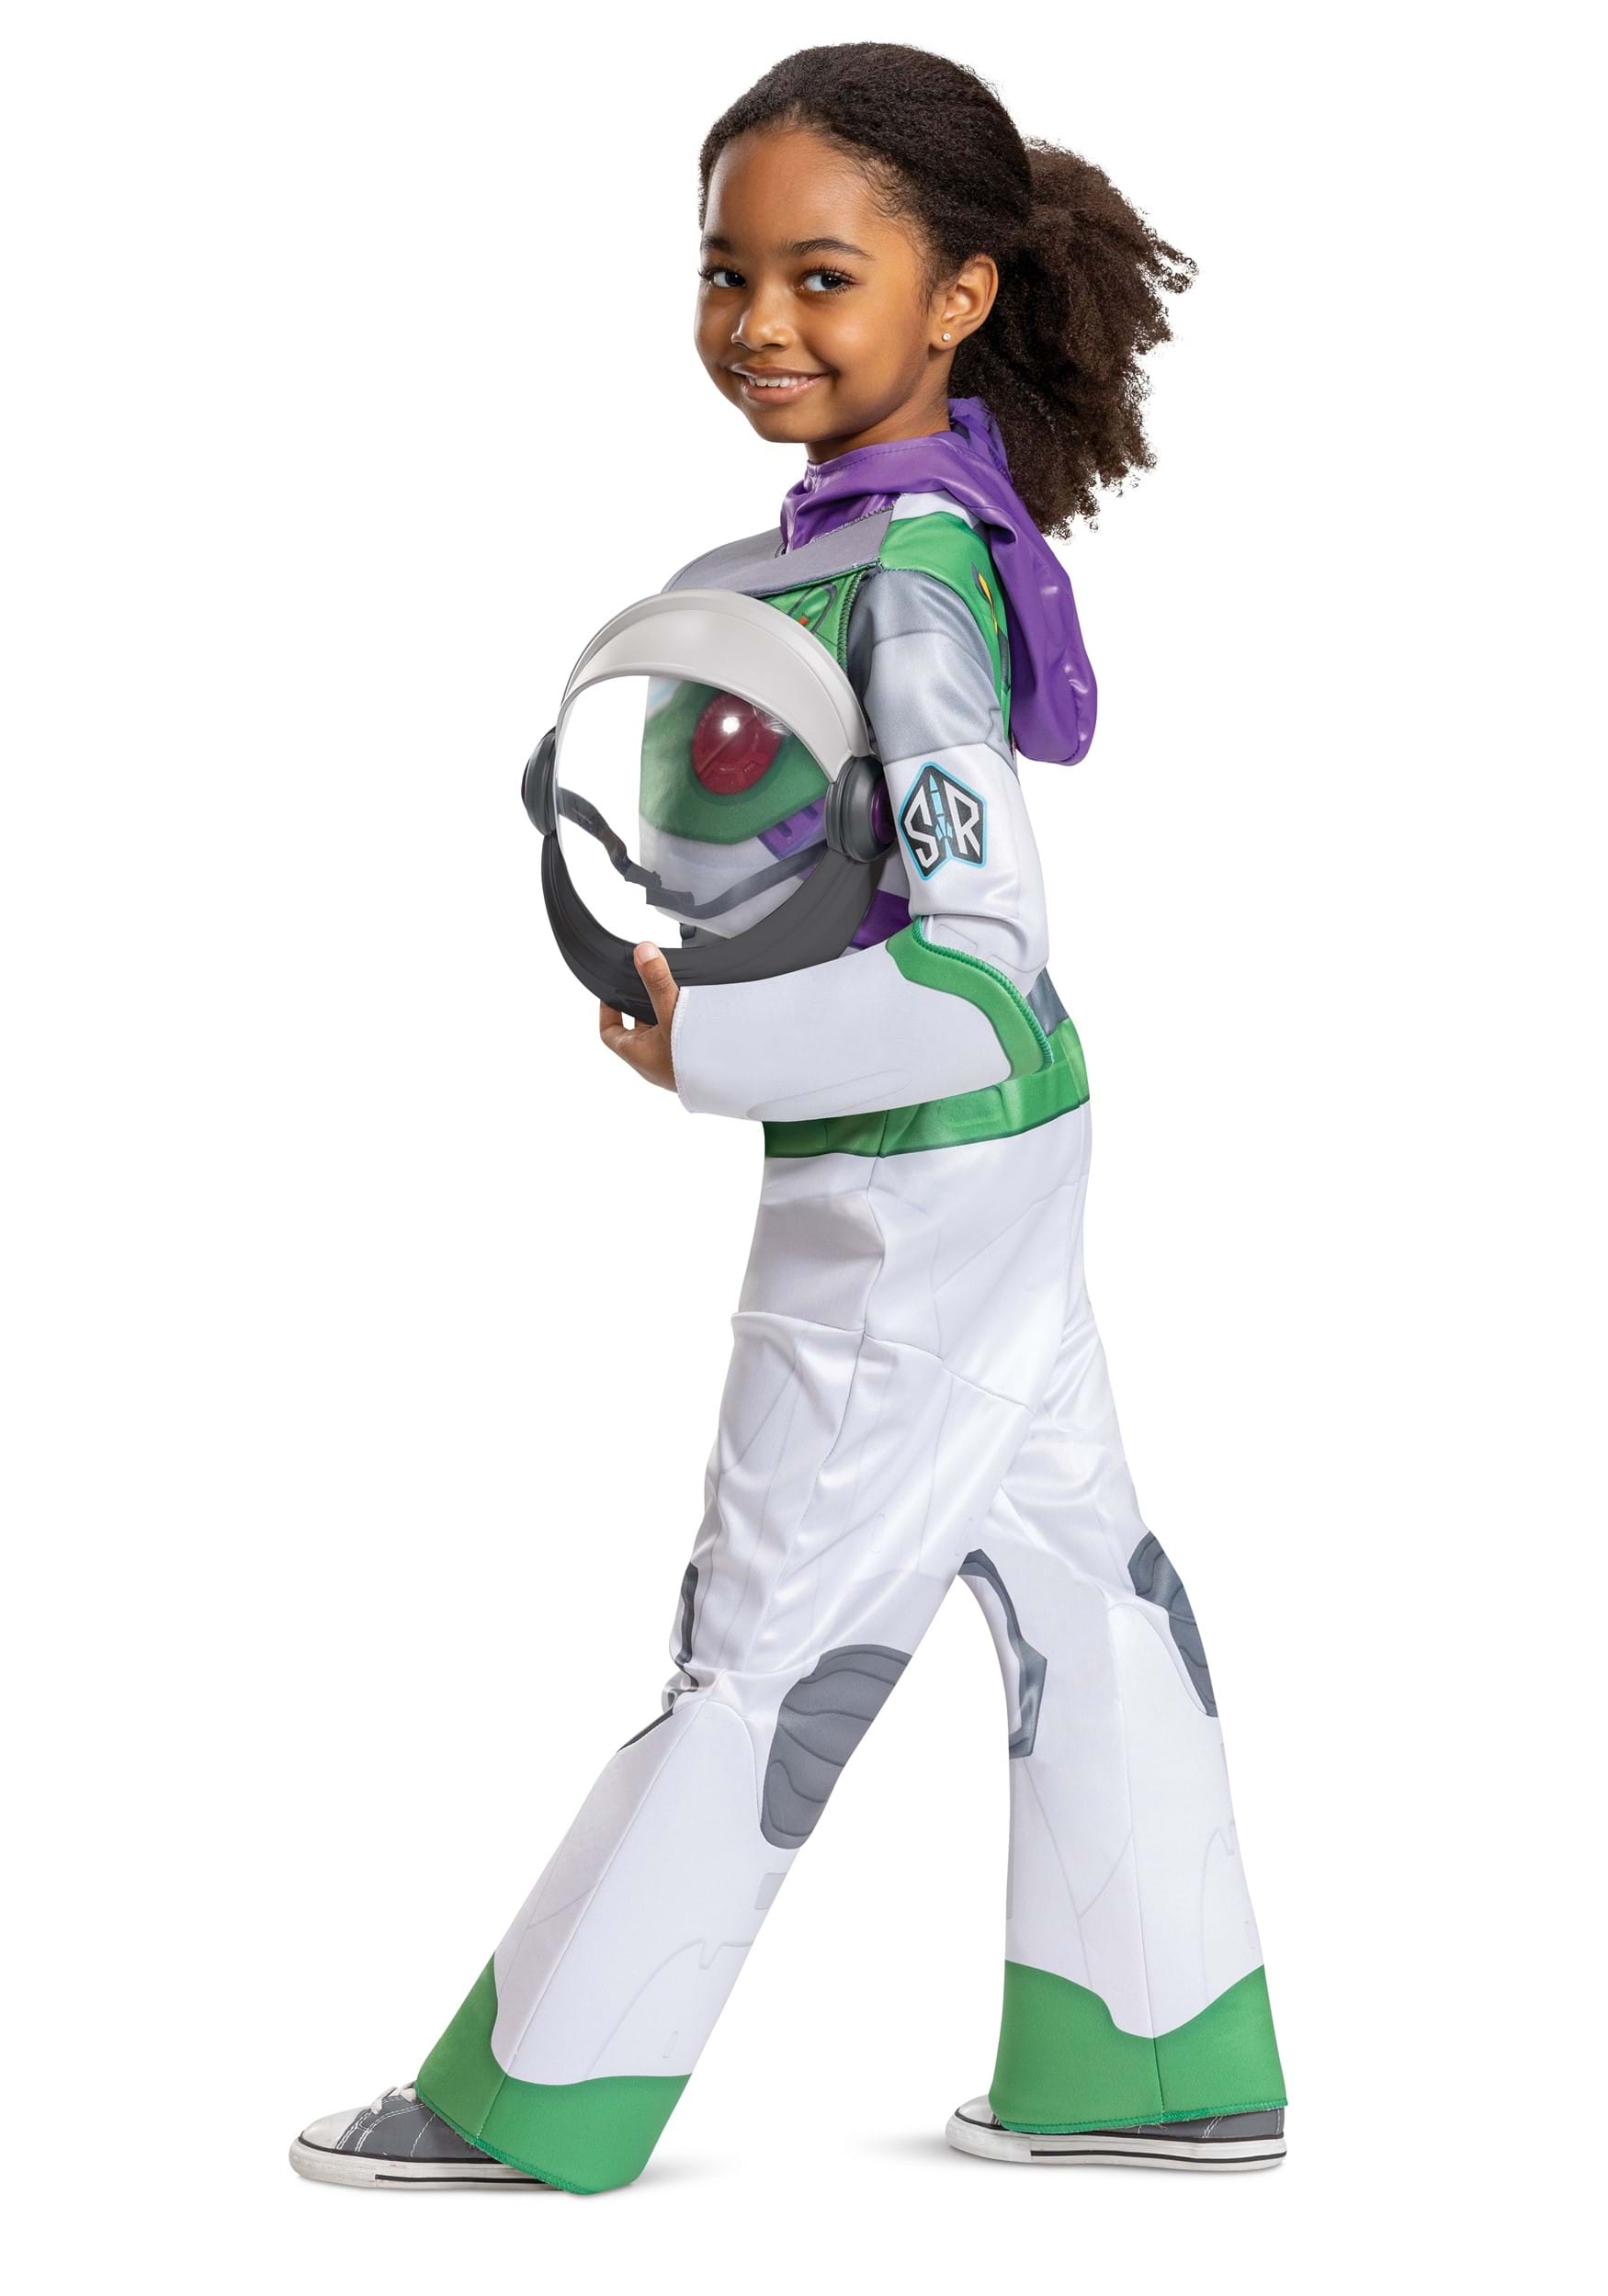 Toddler Girl's Deluxe Disney Toy Story Jessie Costume, 57% OFF